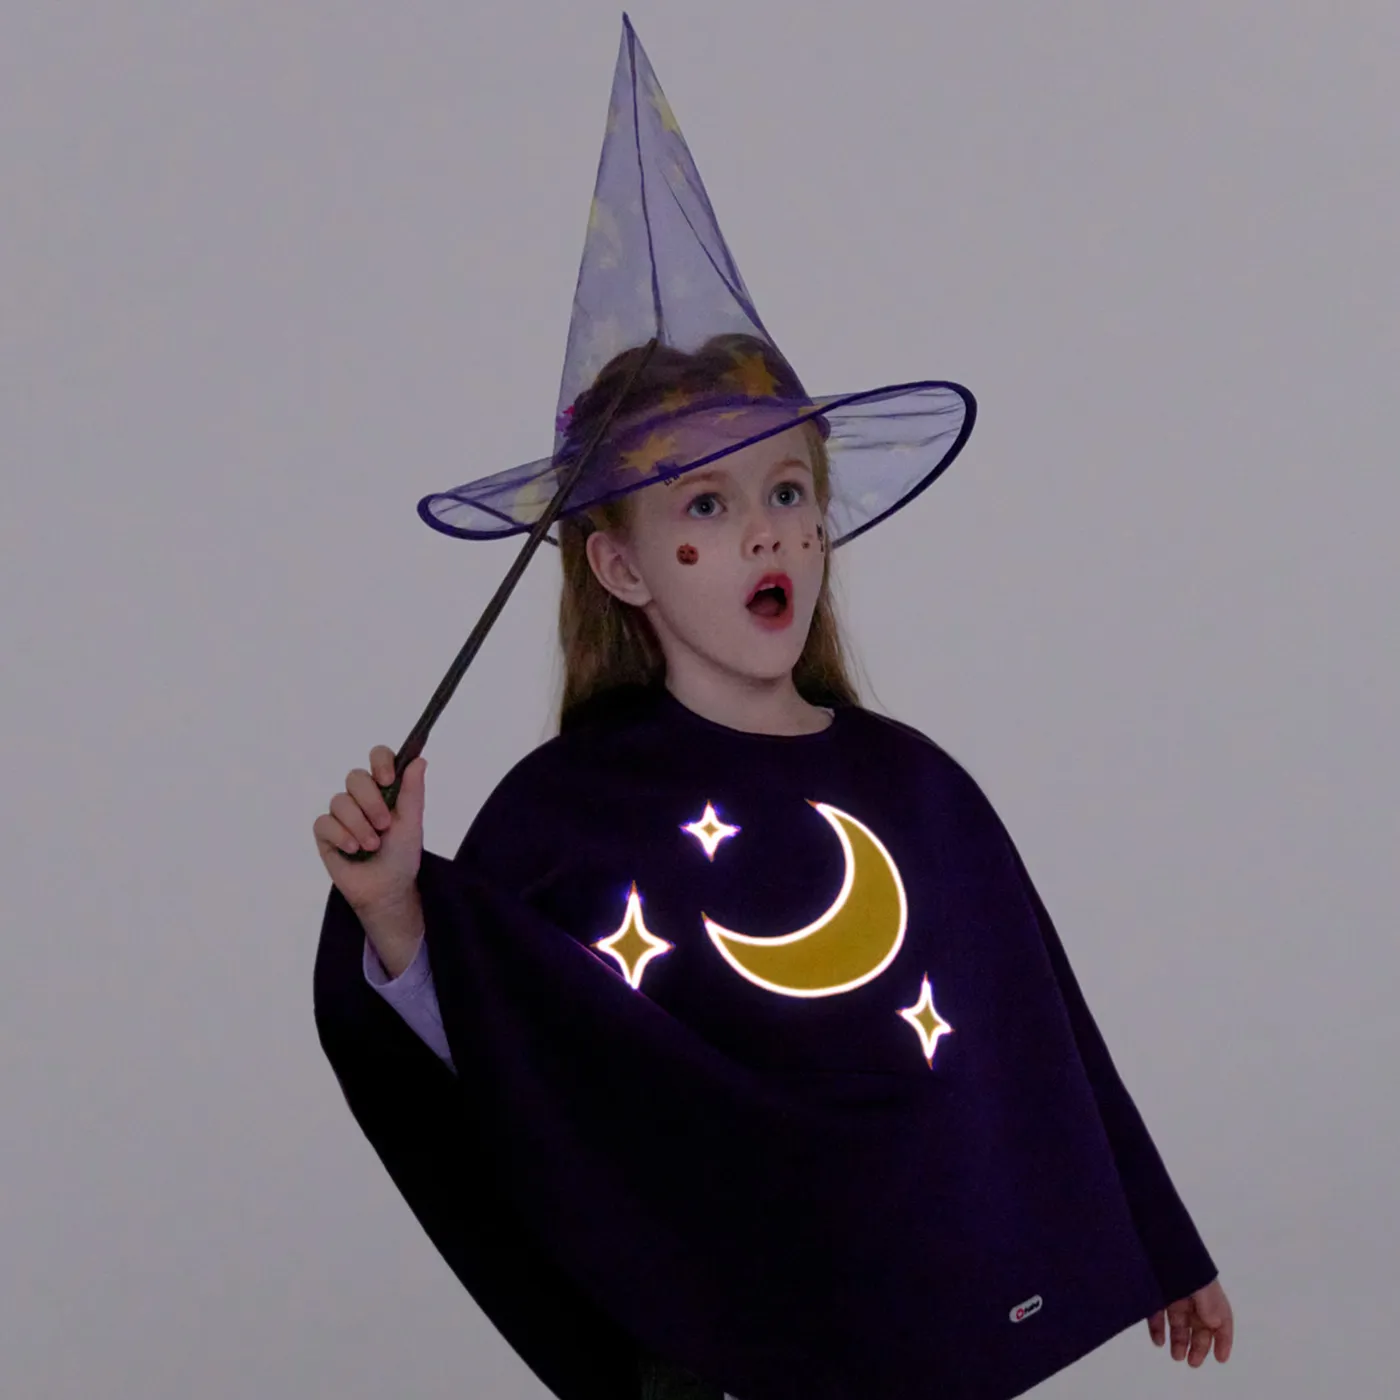 Go-Glow Halloween Illuminating Purple Cape With Wizard Hat With Light Up Moon And Stars Including Controller (Built-In Battery)